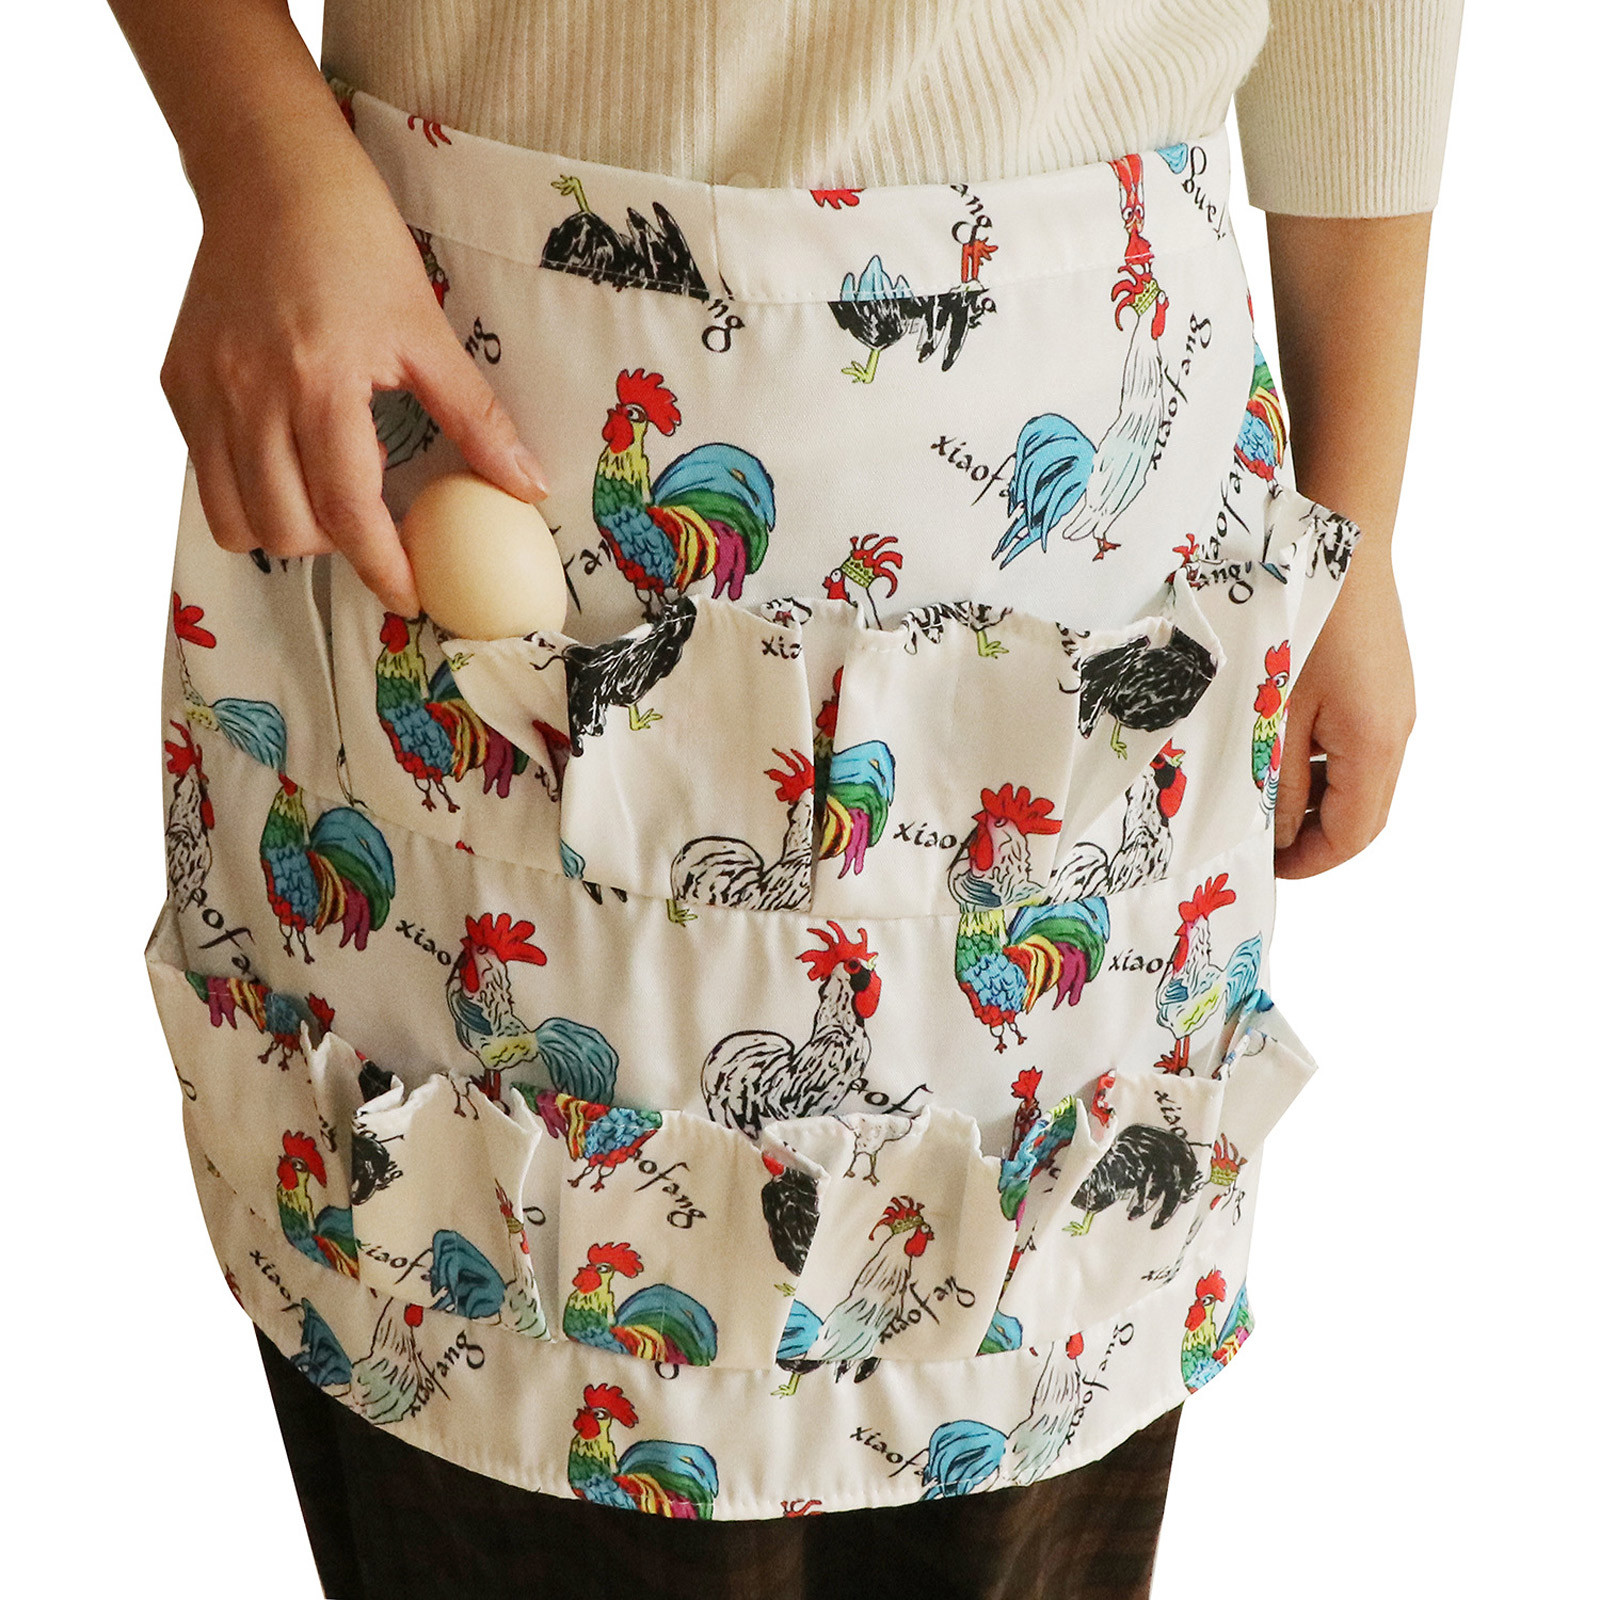 Egg Apron with 12 Pockets, Egg Collecting Apron, Gathering Holding Apron  for Chicken Hen Duck Goose Eggs,Chicken Egg Holder Apron for Kids Housewife  Farmer 